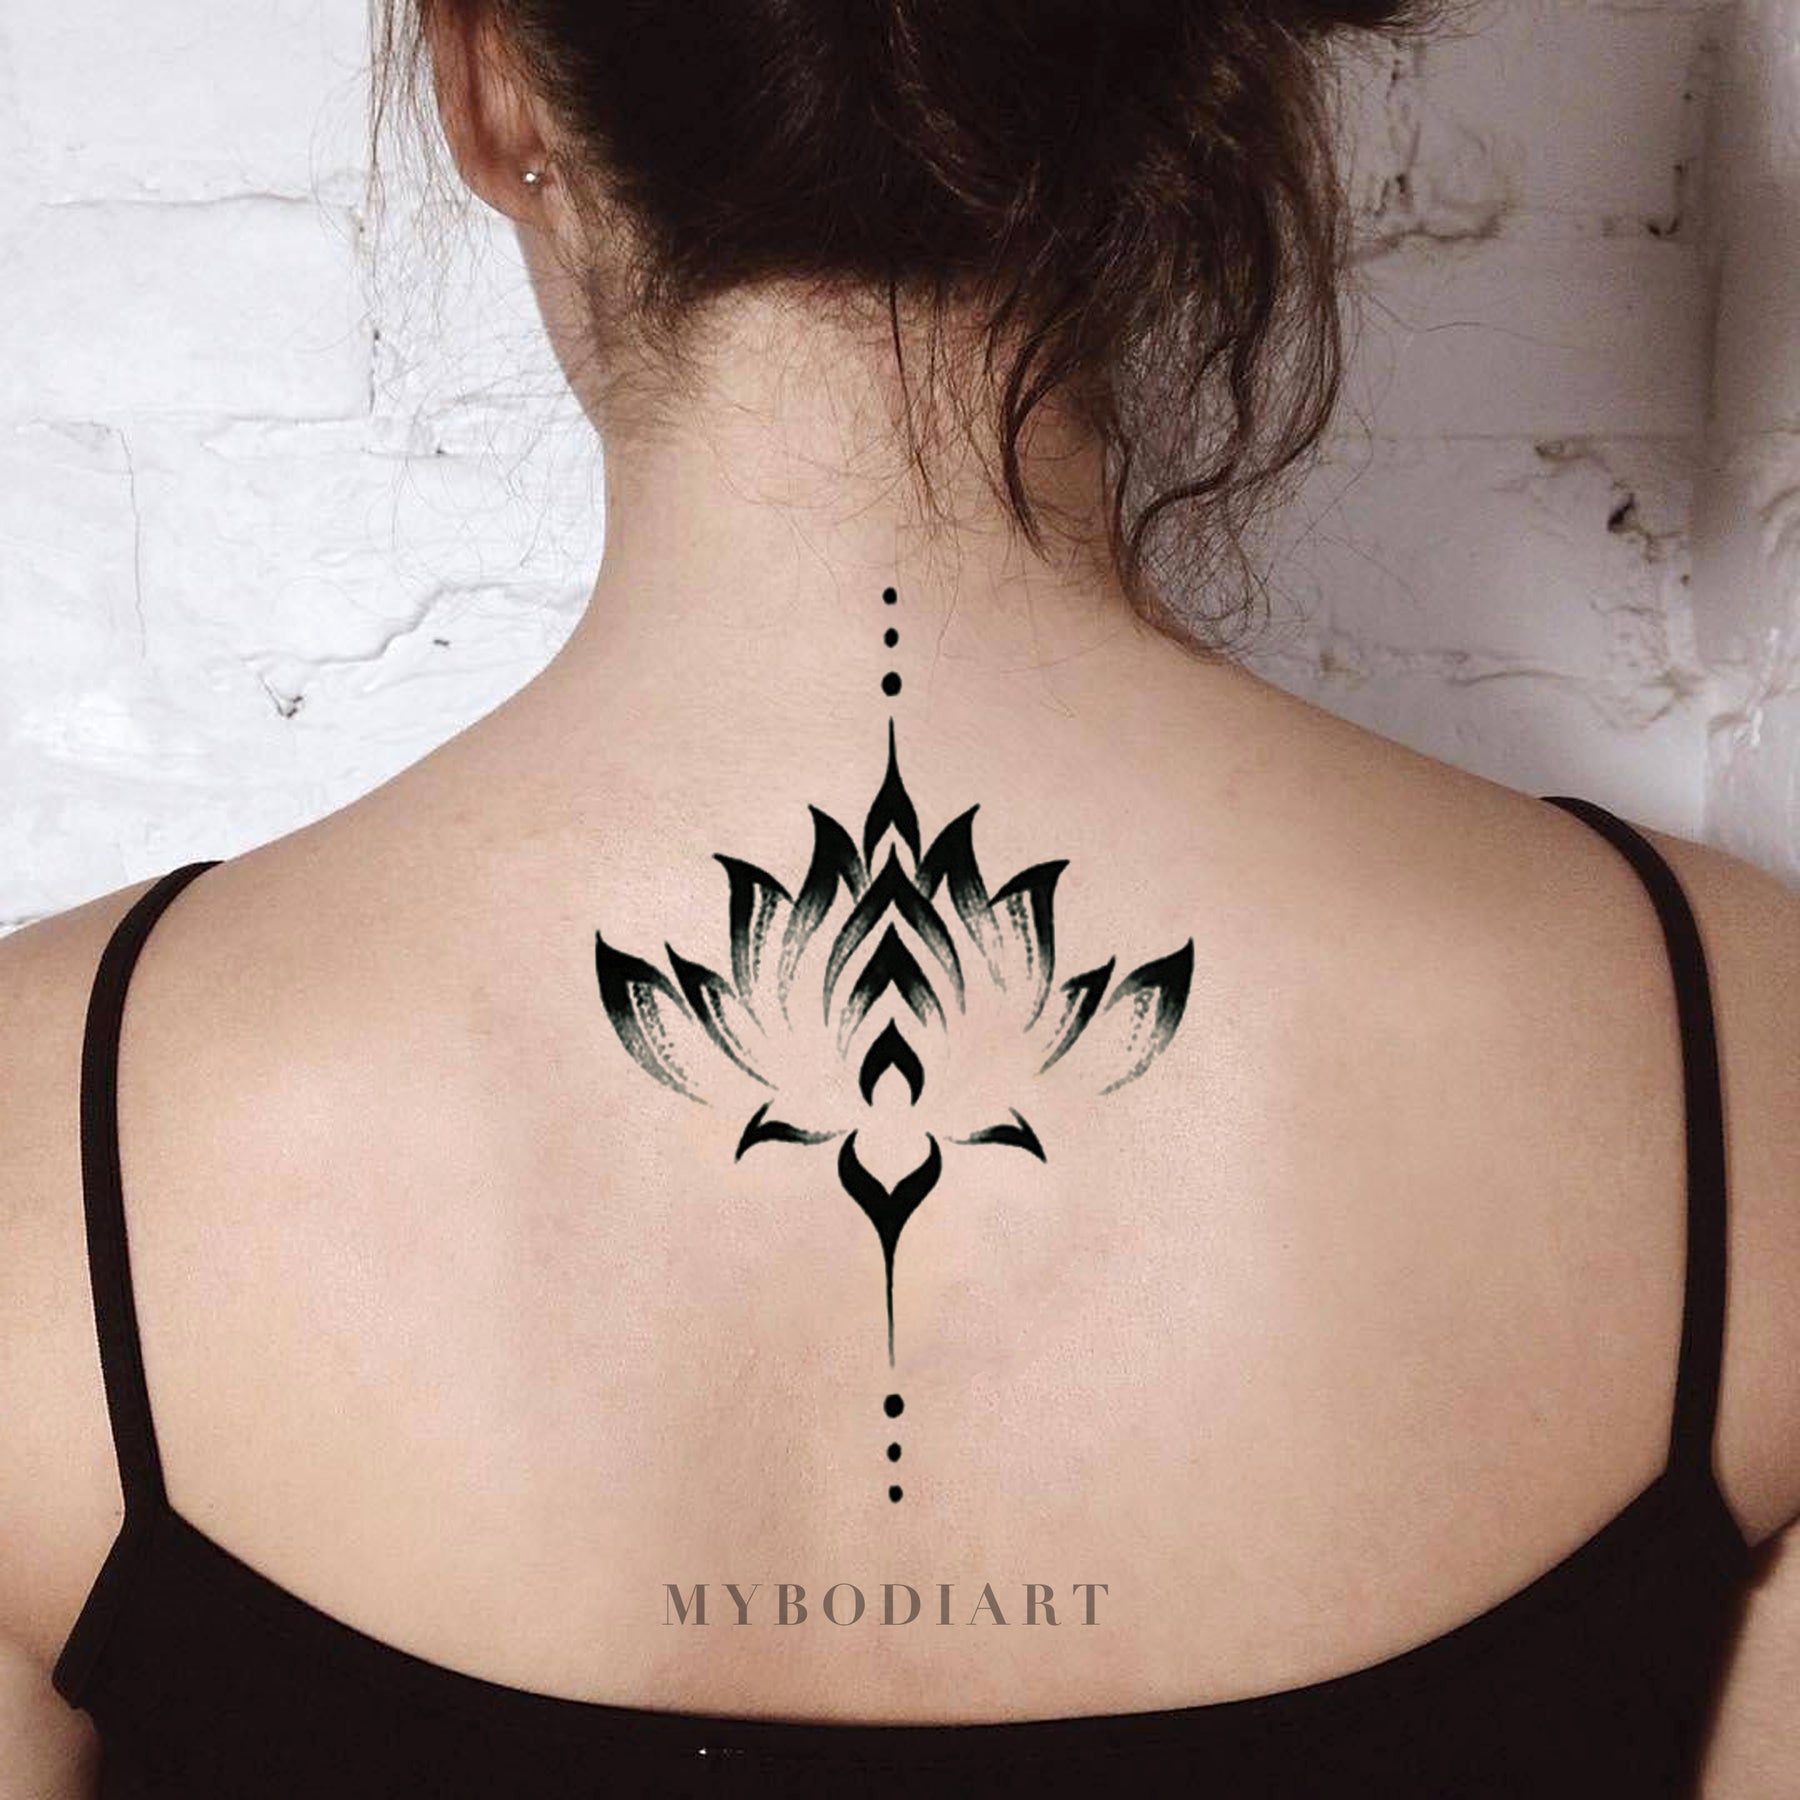 Floral ornament tattoo on the back